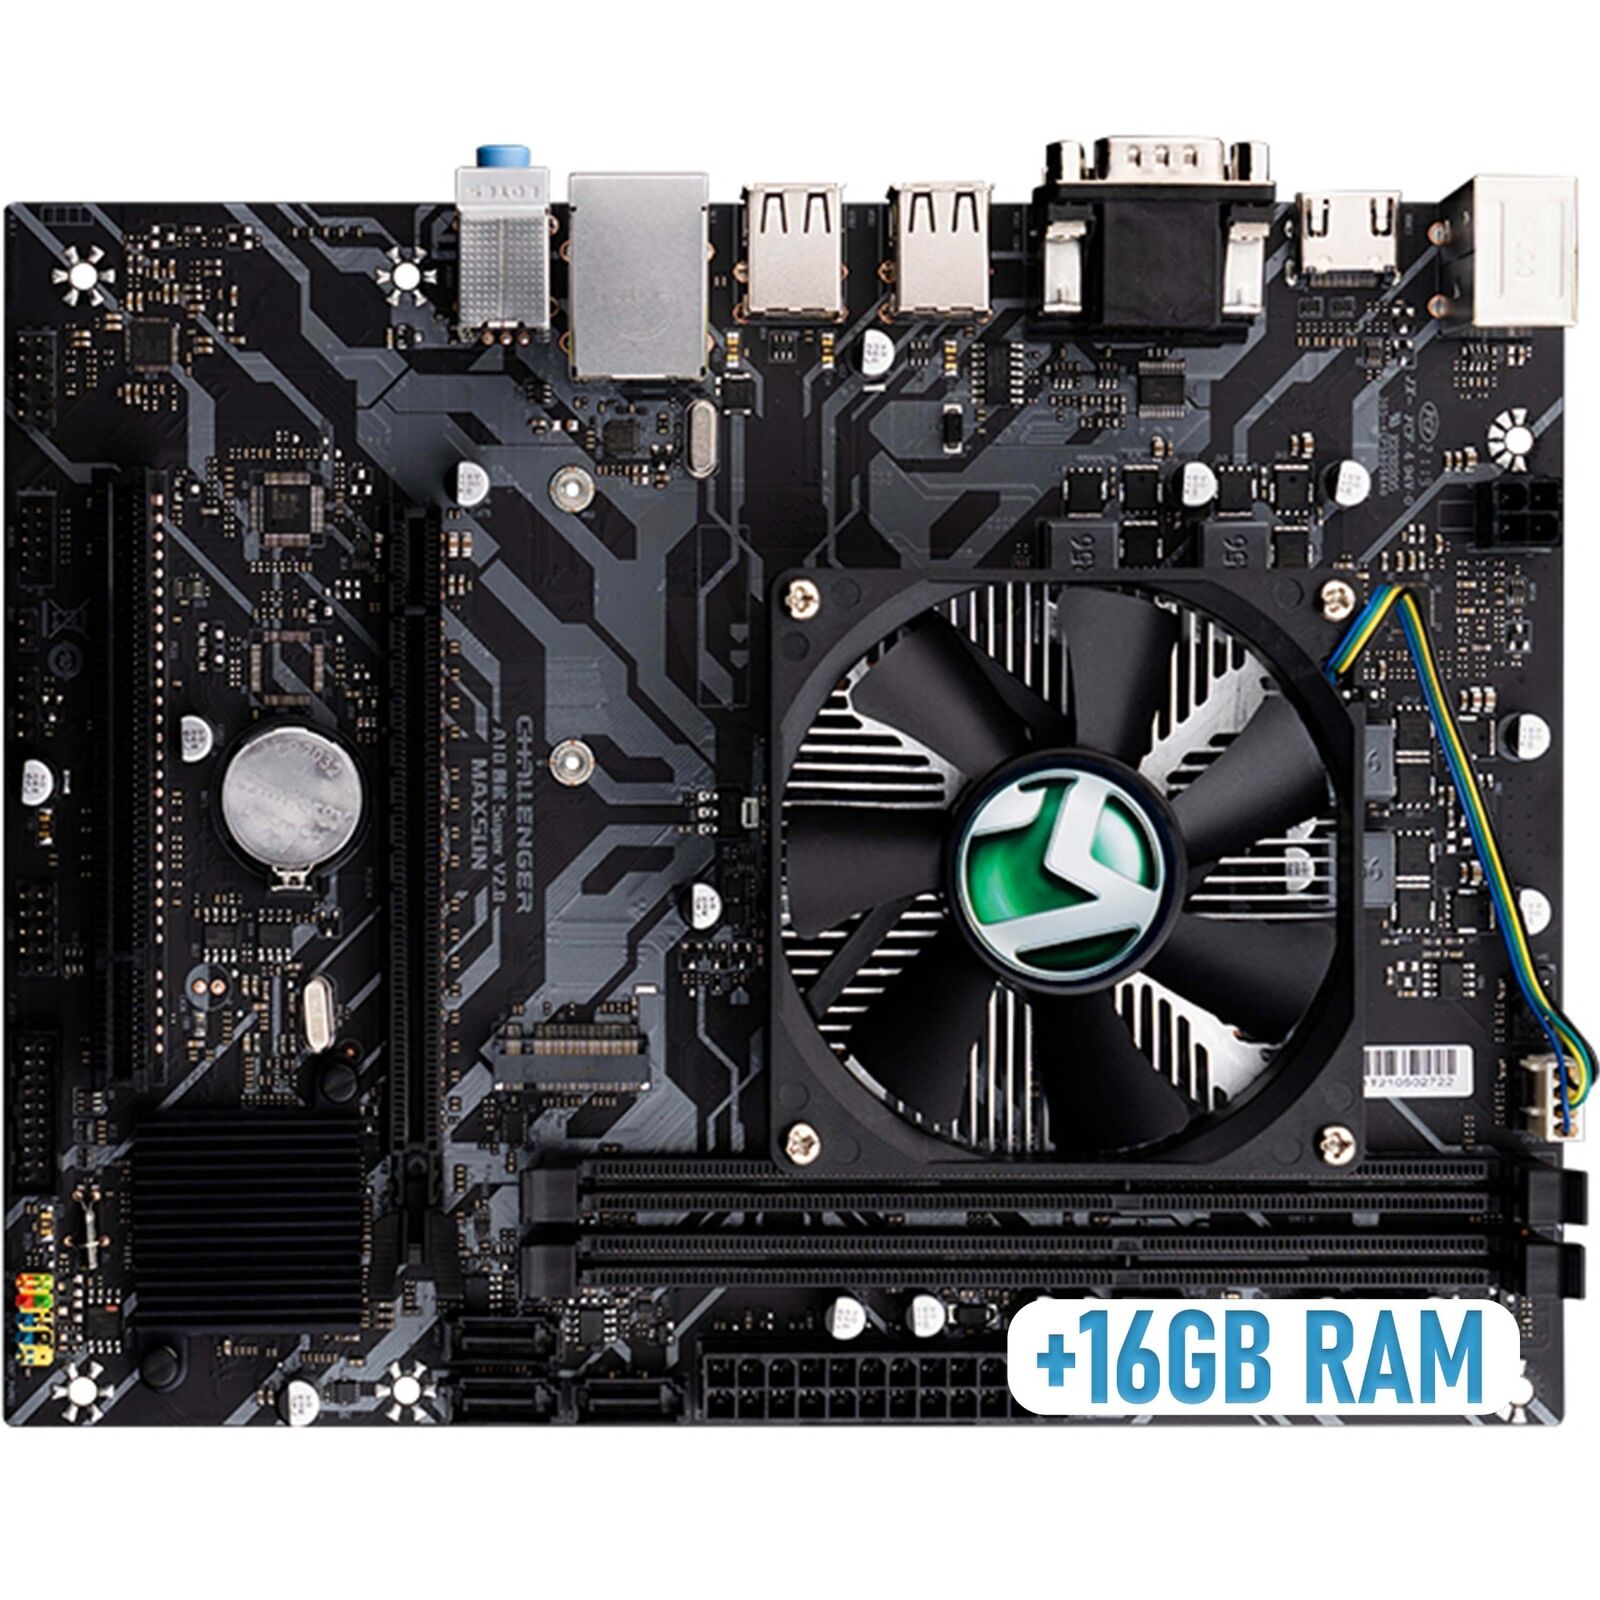 Motherboard With Processor Heatsink And 16GB RAM Included Quadcore M-ATX RS232